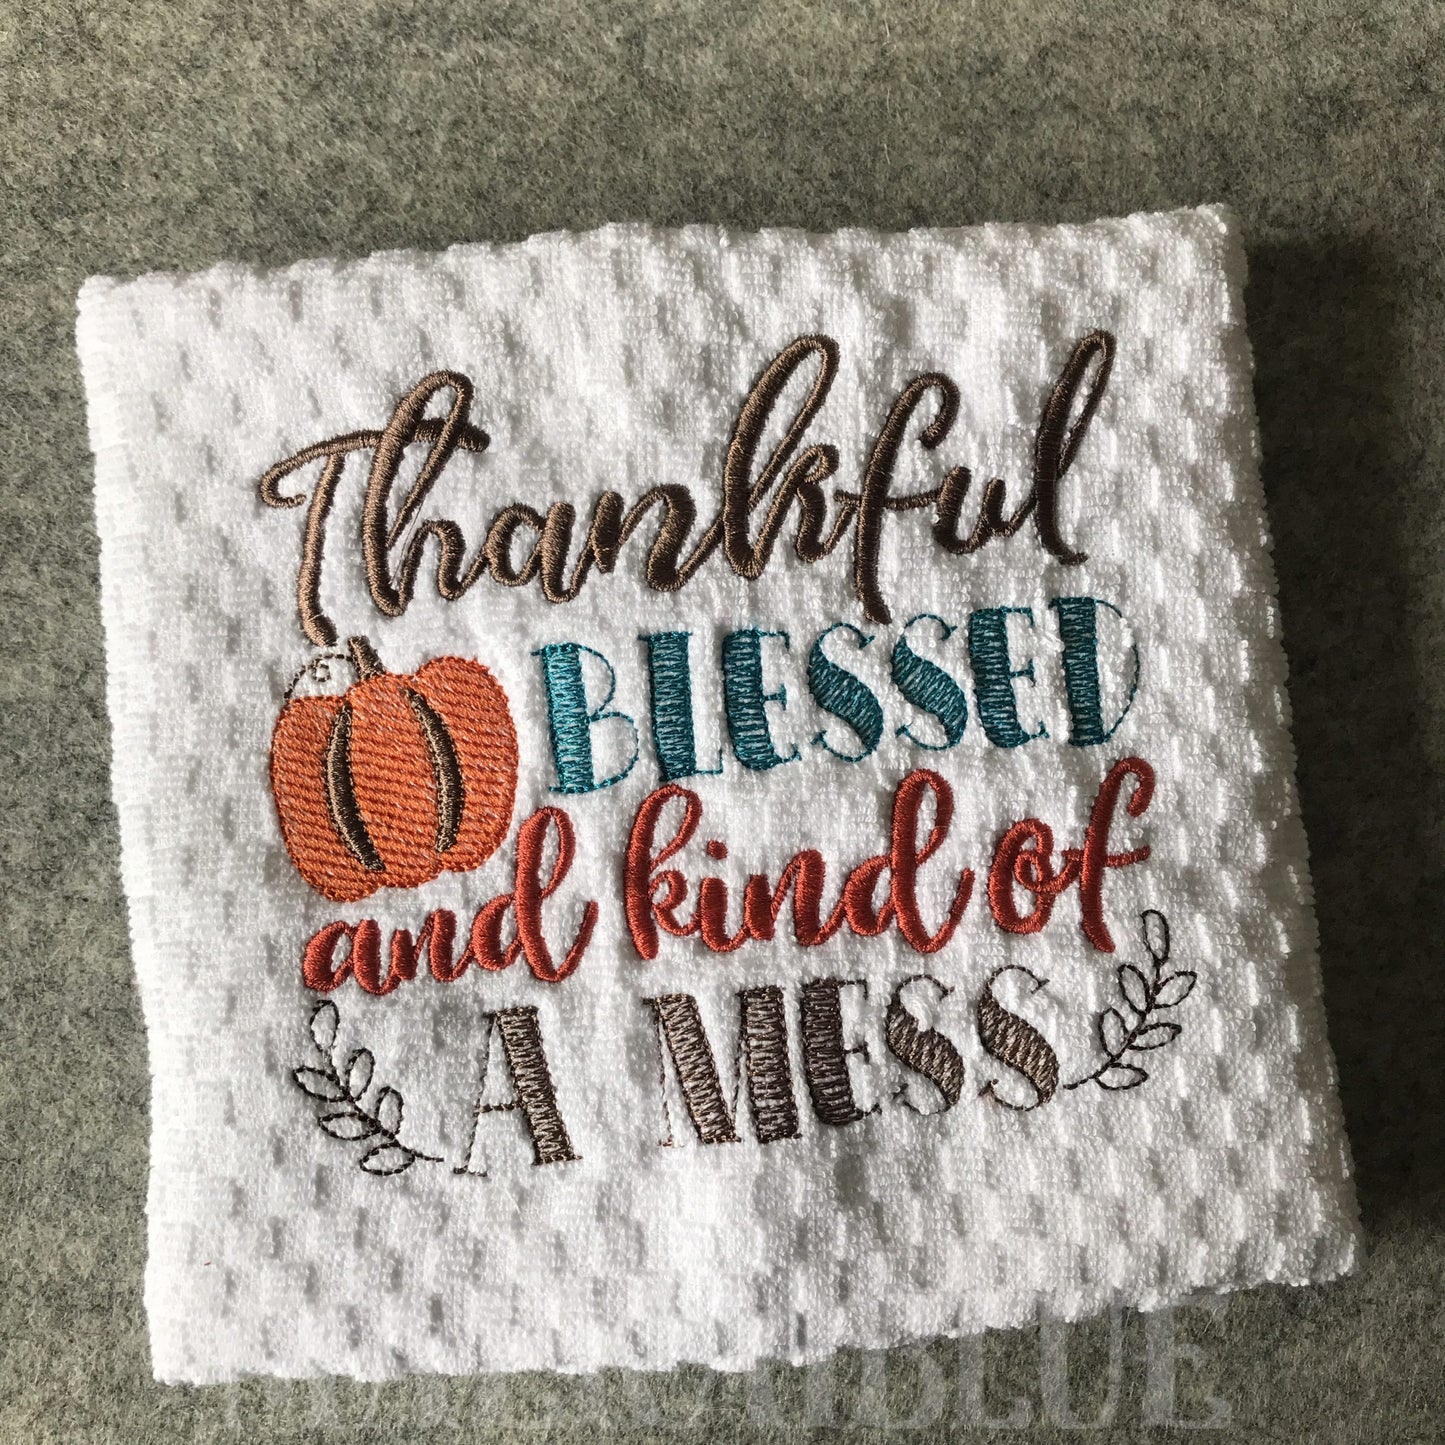 Thankful Blessed and Kind of a Mess - 3 Sizes - Digital Embroidery Design